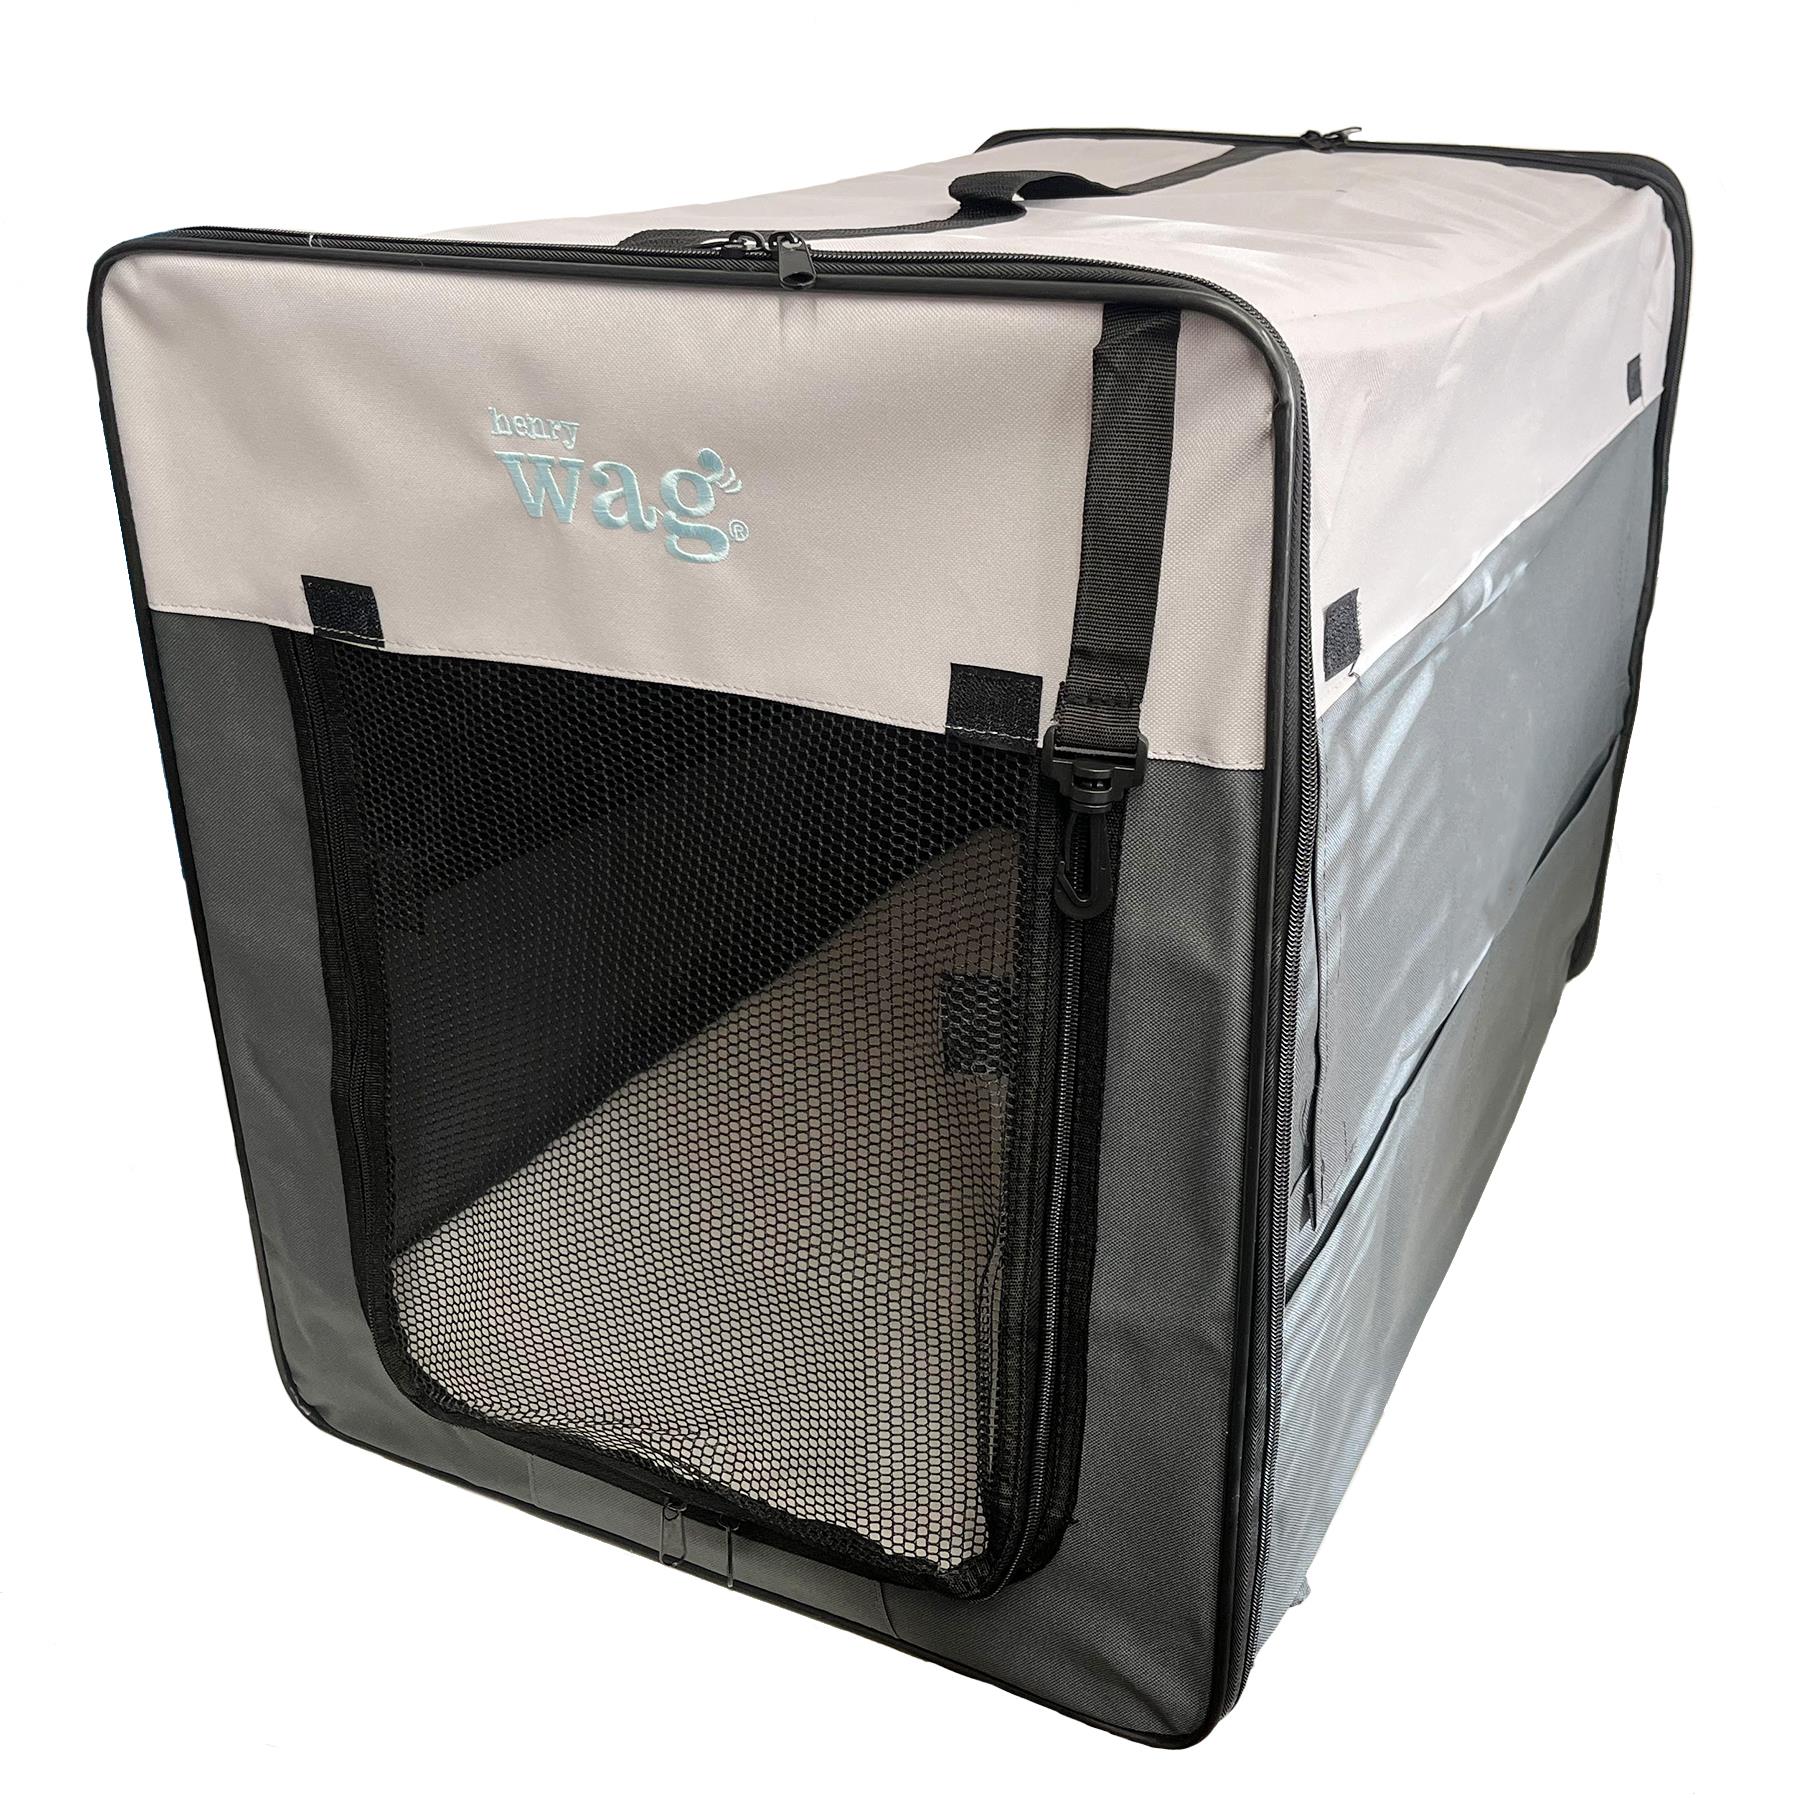 Large High Quality Folding Fabric Car / Travel Dog Crate With 3 Mesh Windows